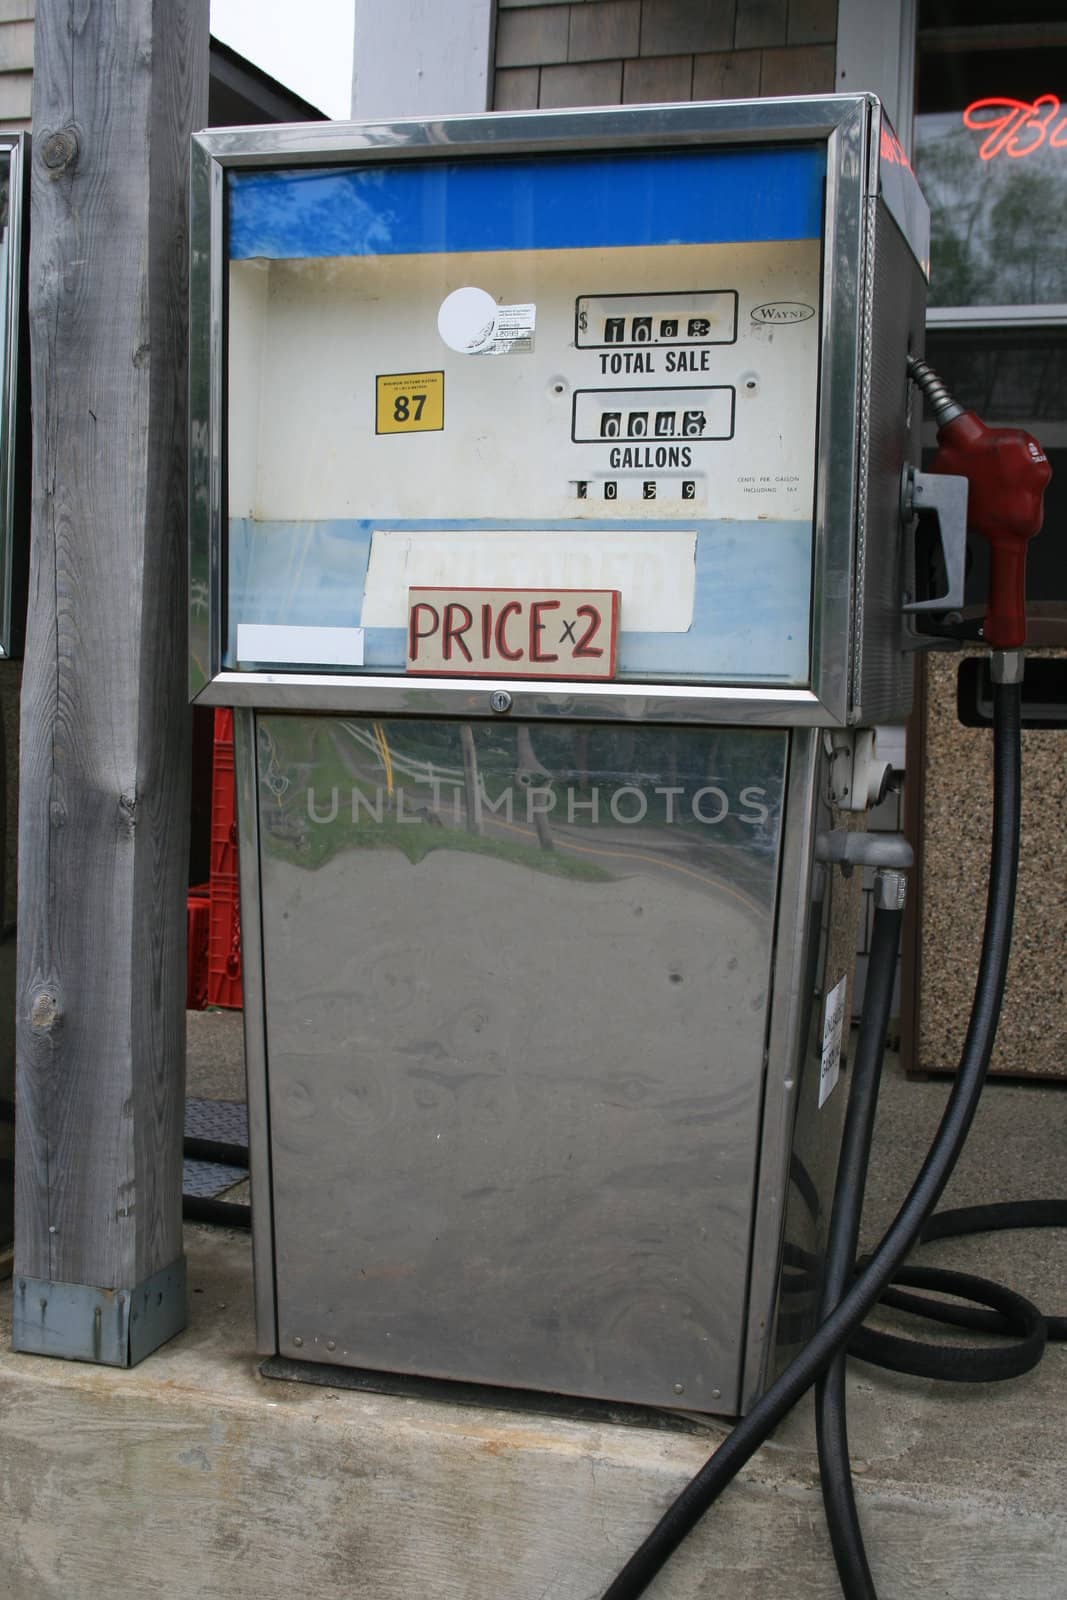 an antiquated gas pump at a small country store - so out-of-date that customers must double to price shown on the pump tp be accurate